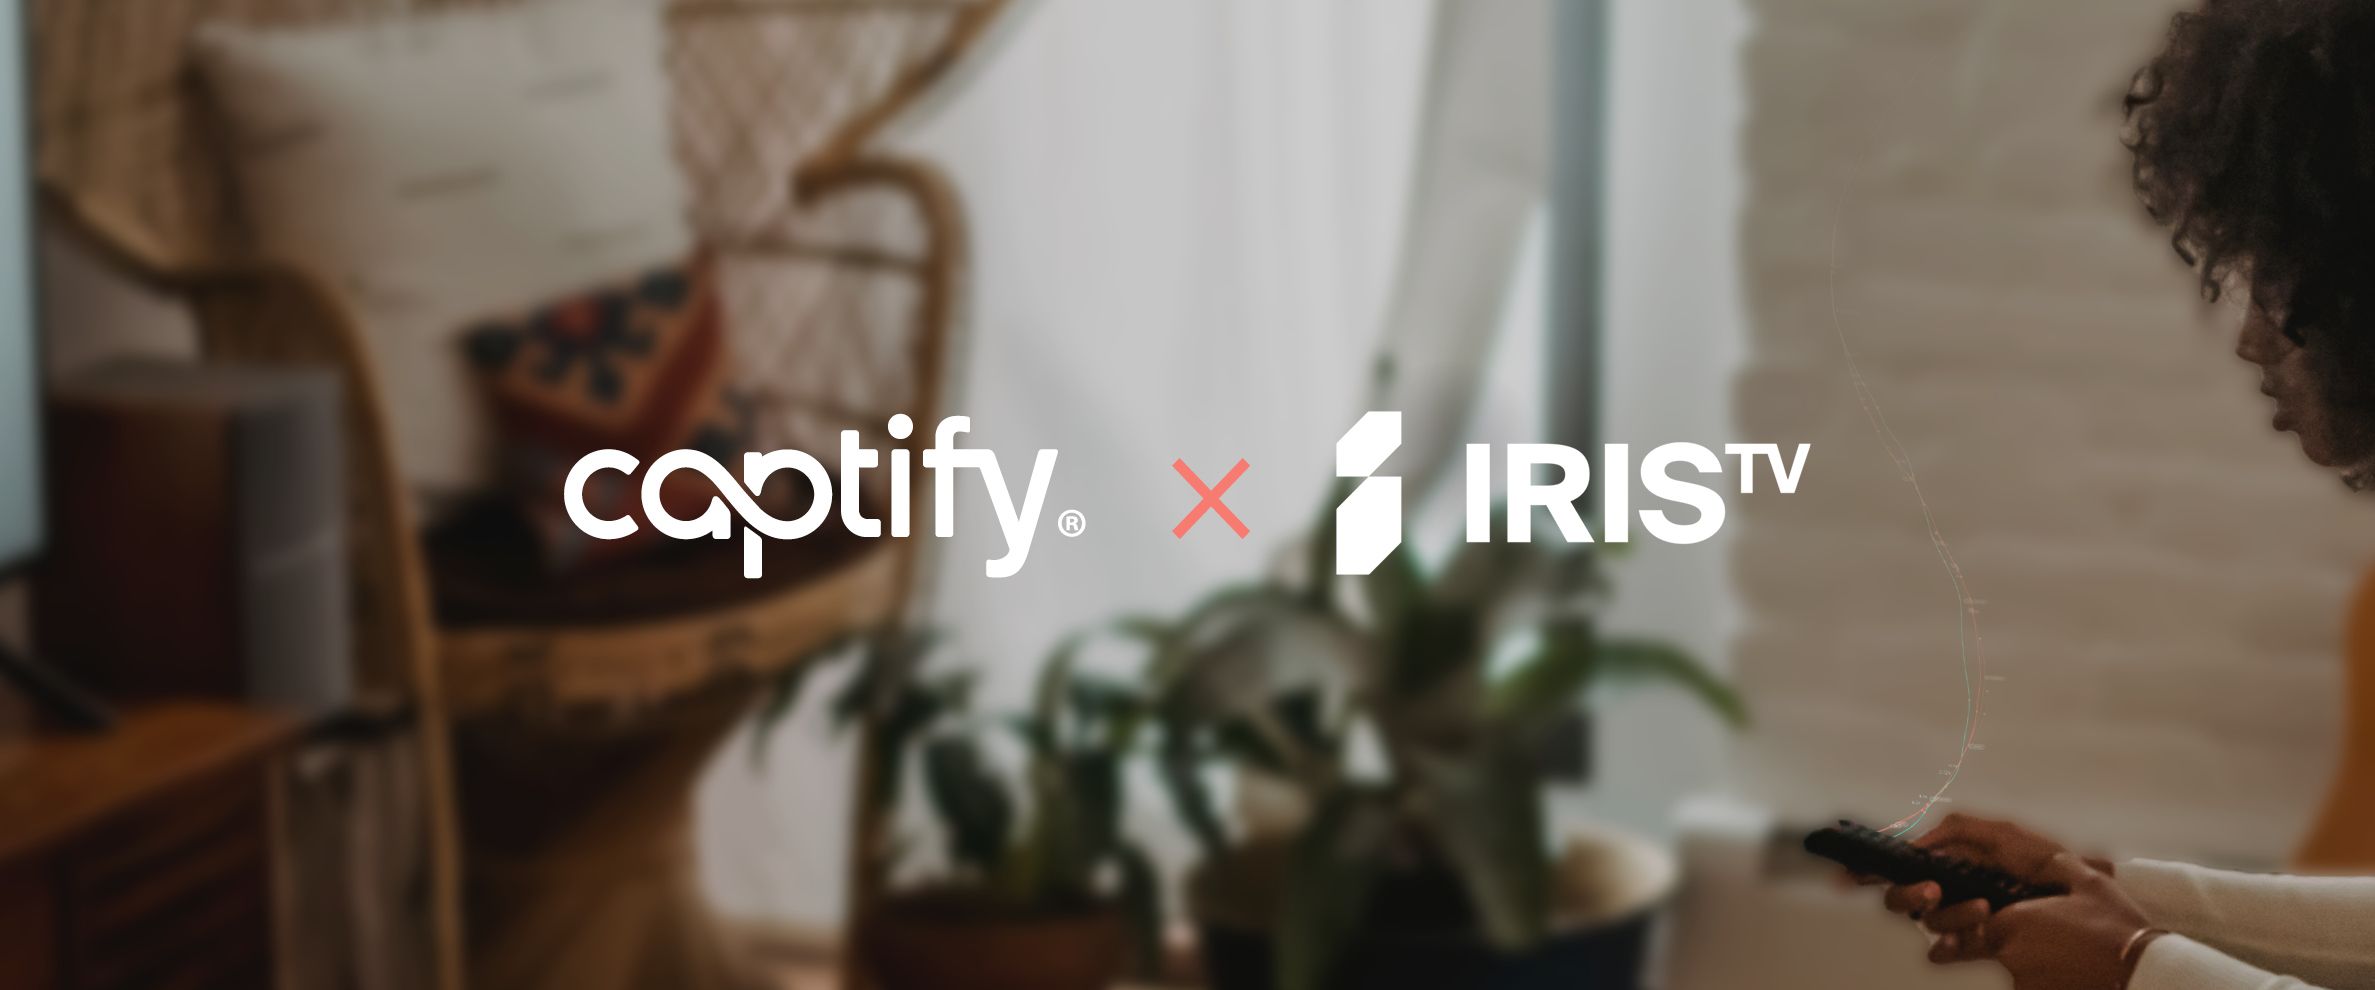 Captify Integrates with IRIS.TV to Provide Video-Level Data for Connected TV Media Buying